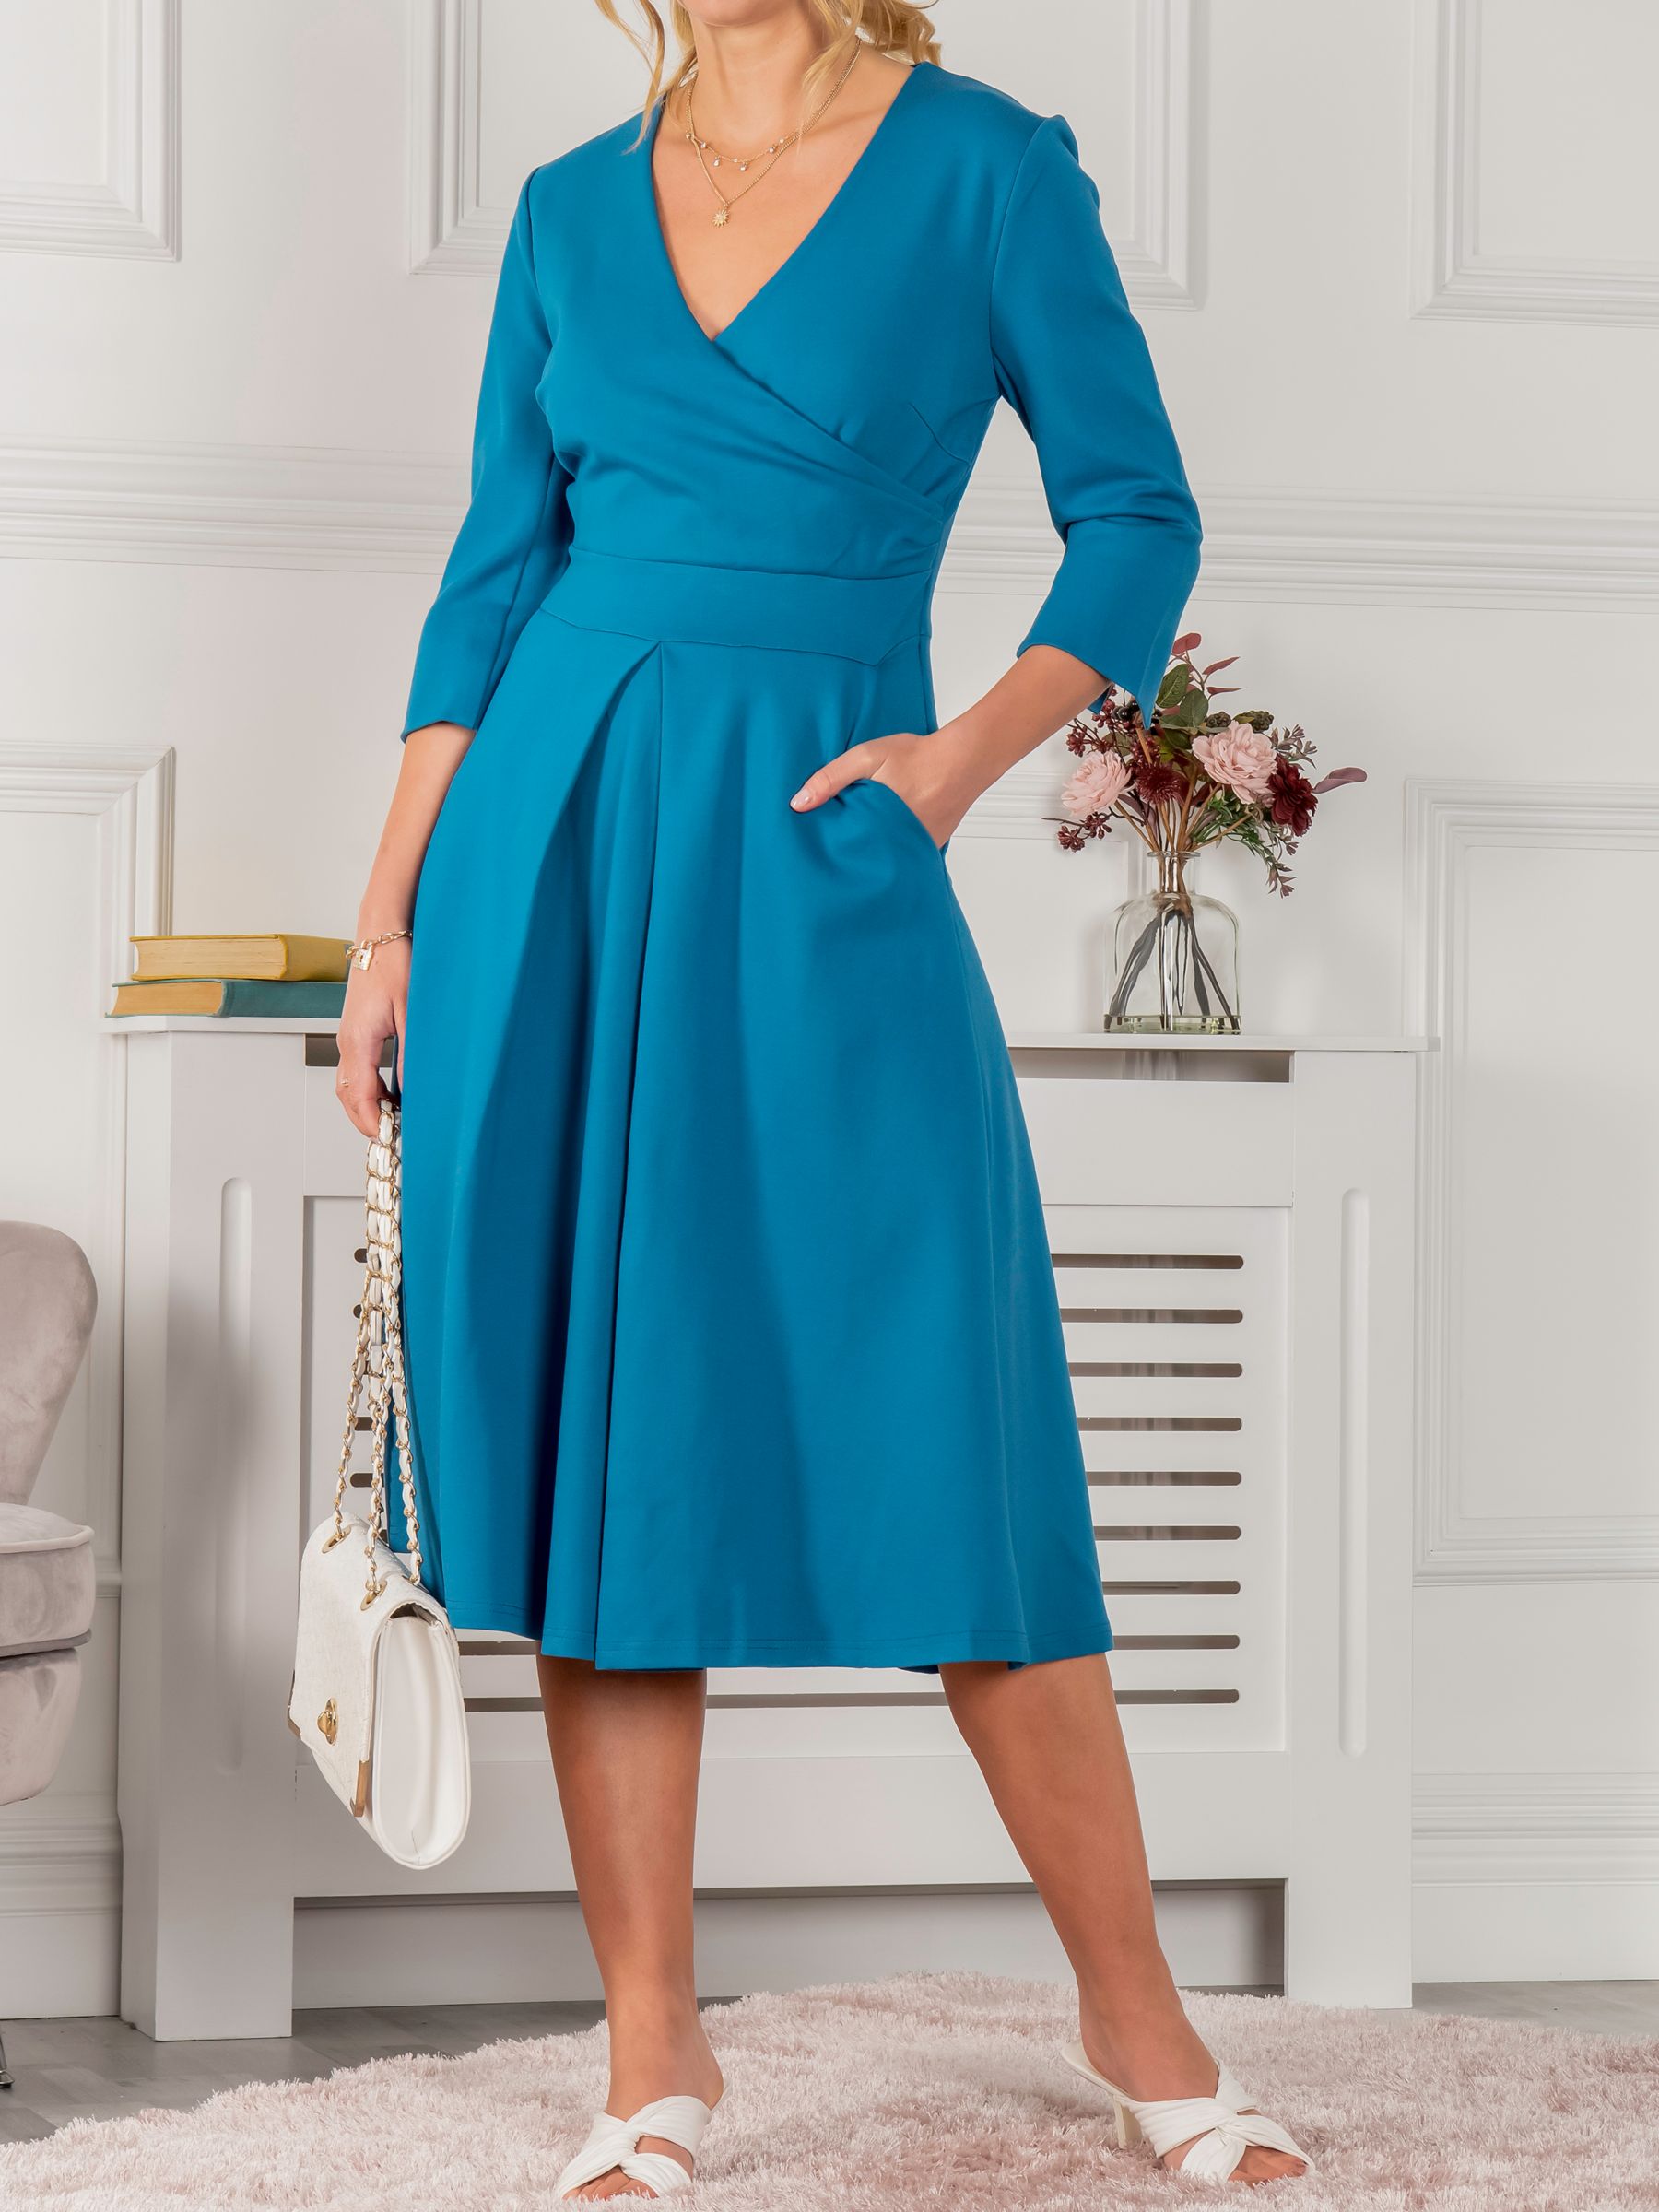 Jolie Moi Paige 3/4 Sleeve Flared Dress, Teal at John Lewis & Partners